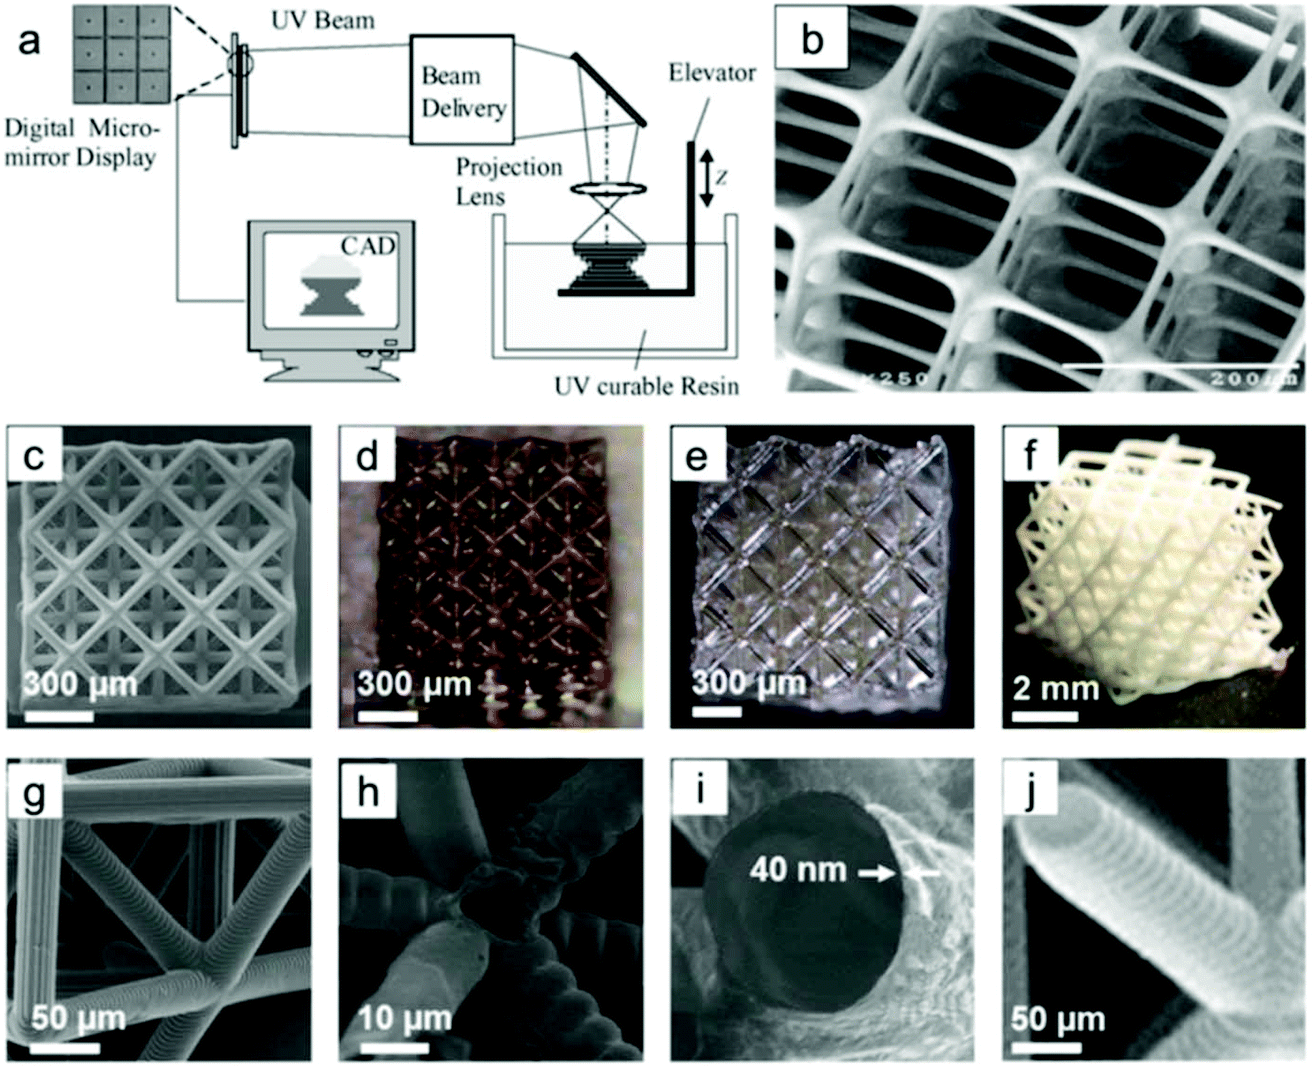 Researchers Enhance Energy Absorption in 3D Printed Octet-plate Lattices -  3D Printing